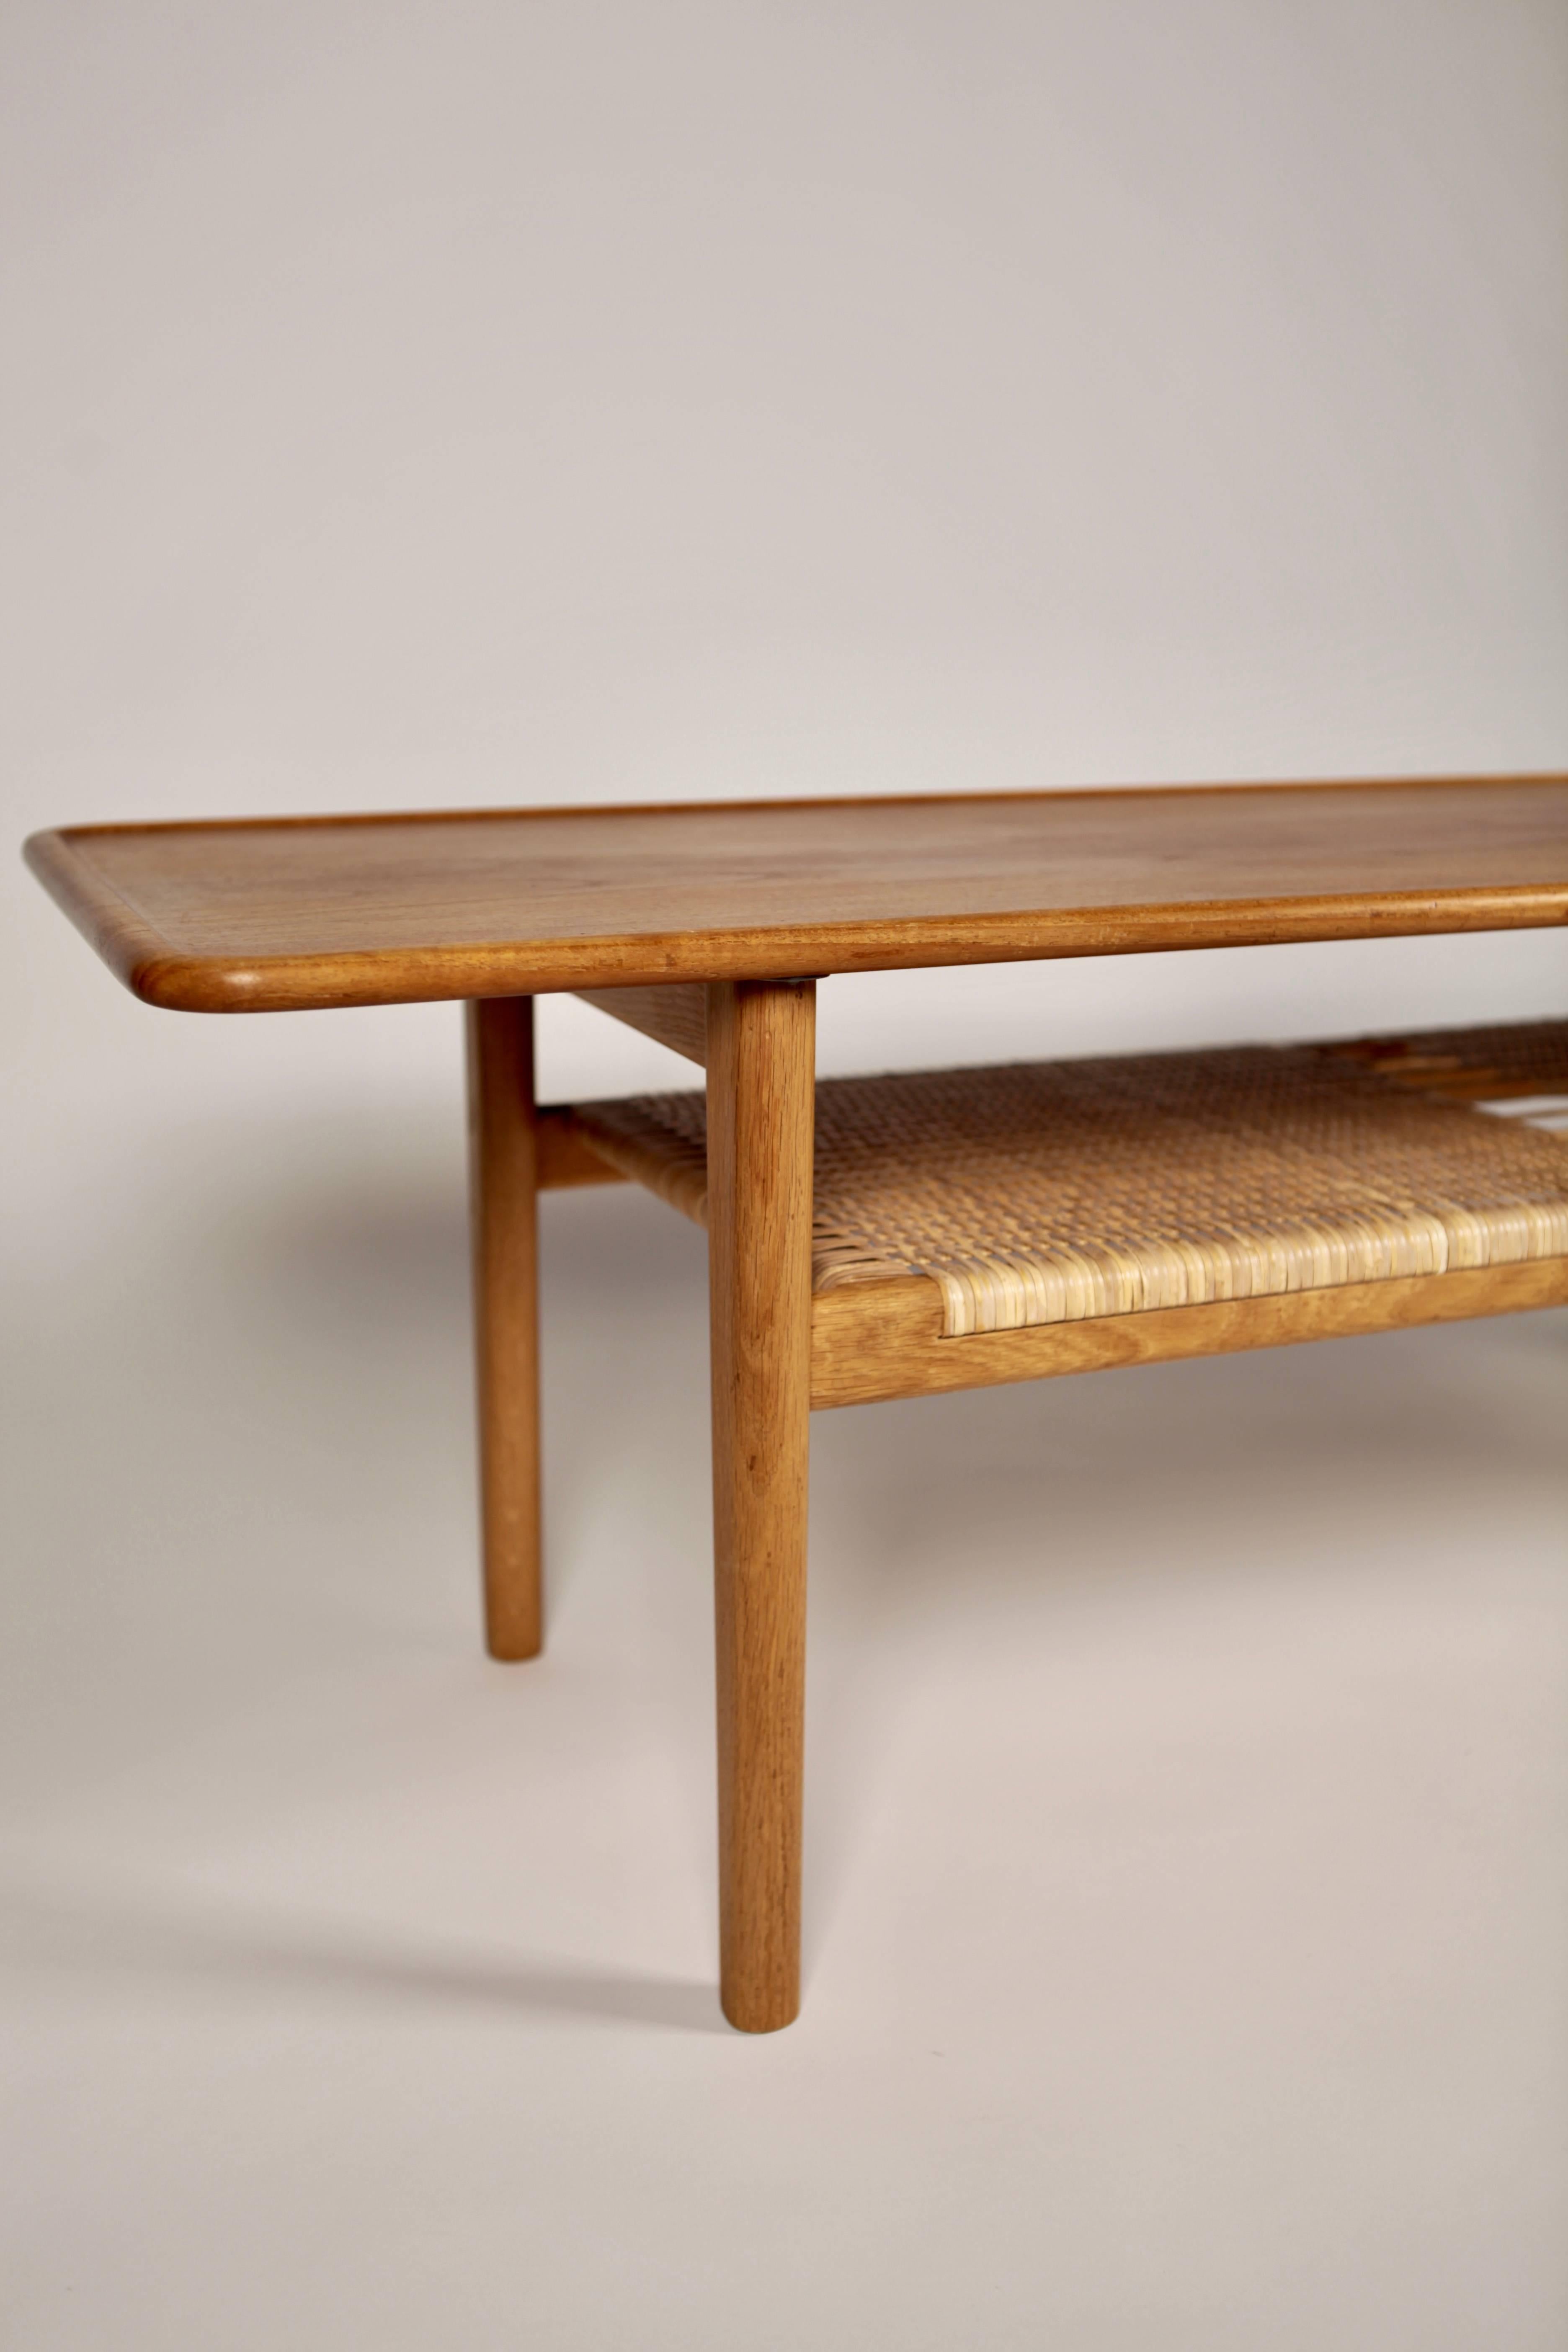 Coffee table AT-10, designed by Hans Wegner and manufactured by cabinetmaker Andreas Tuck in Denmark, 1950s.
Excellent condition.
Teak top, construction in oak and cane.
Signed to the underside.